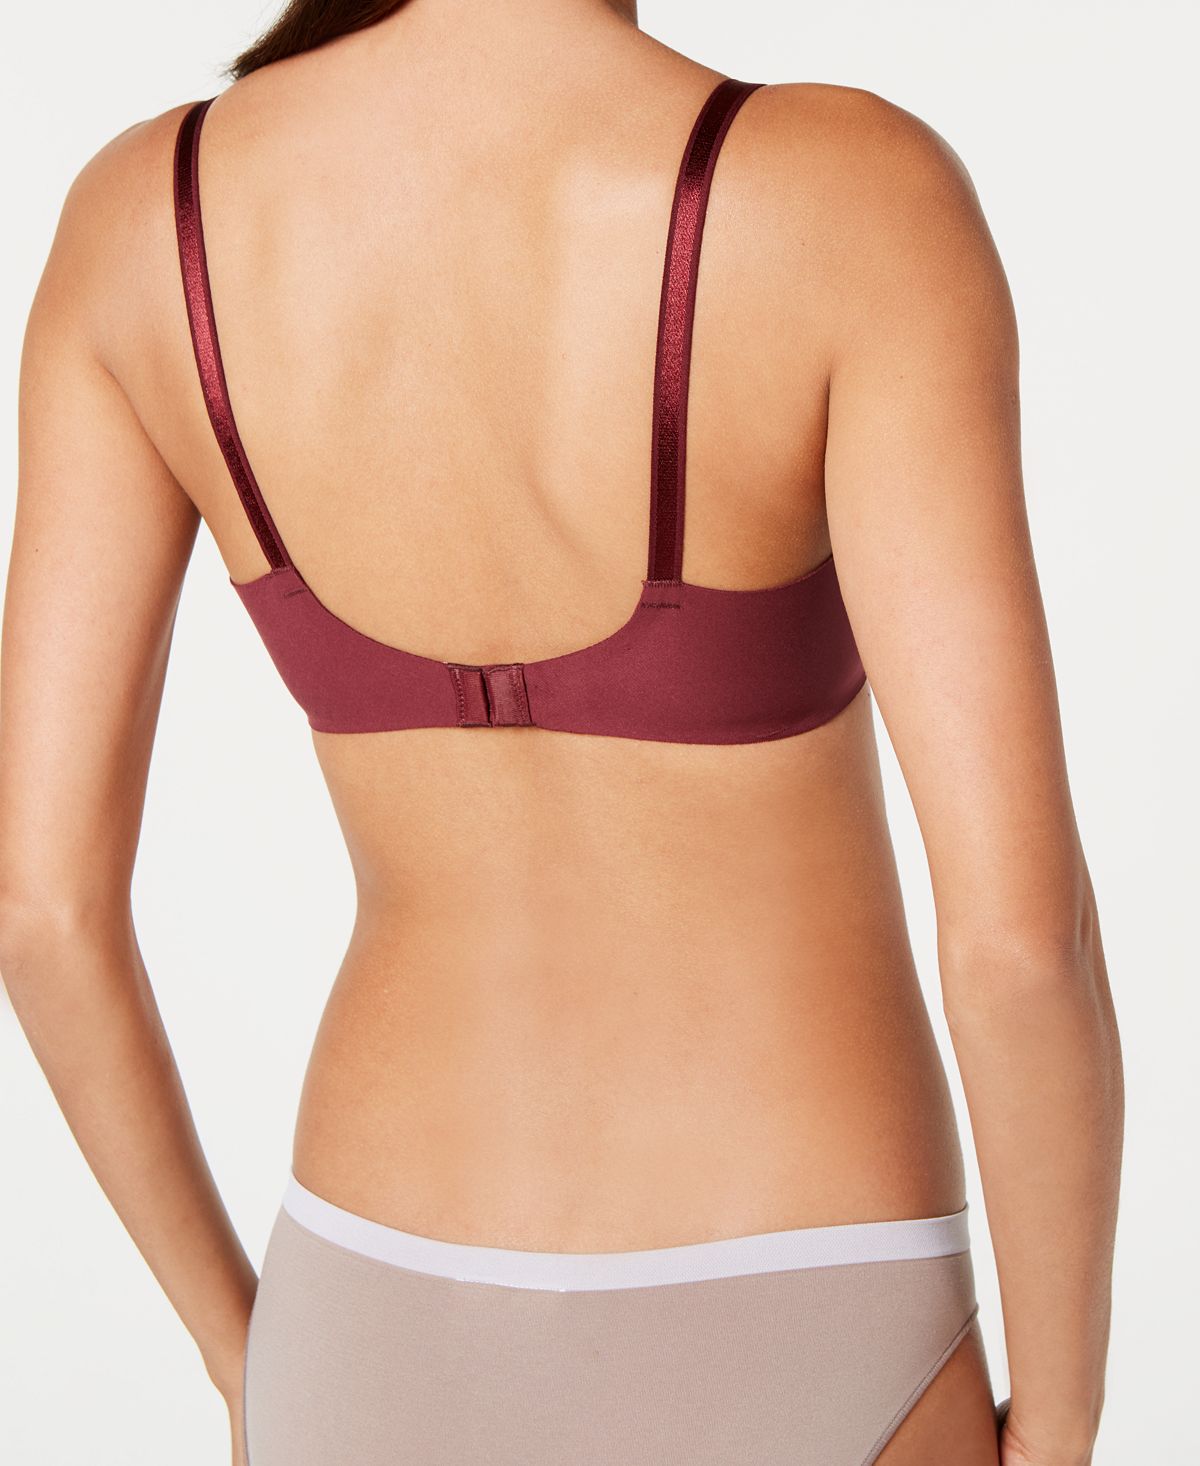 Calvin Klein Invisibles Full Coverage T-shirt Bra Qf1184 Phoebe